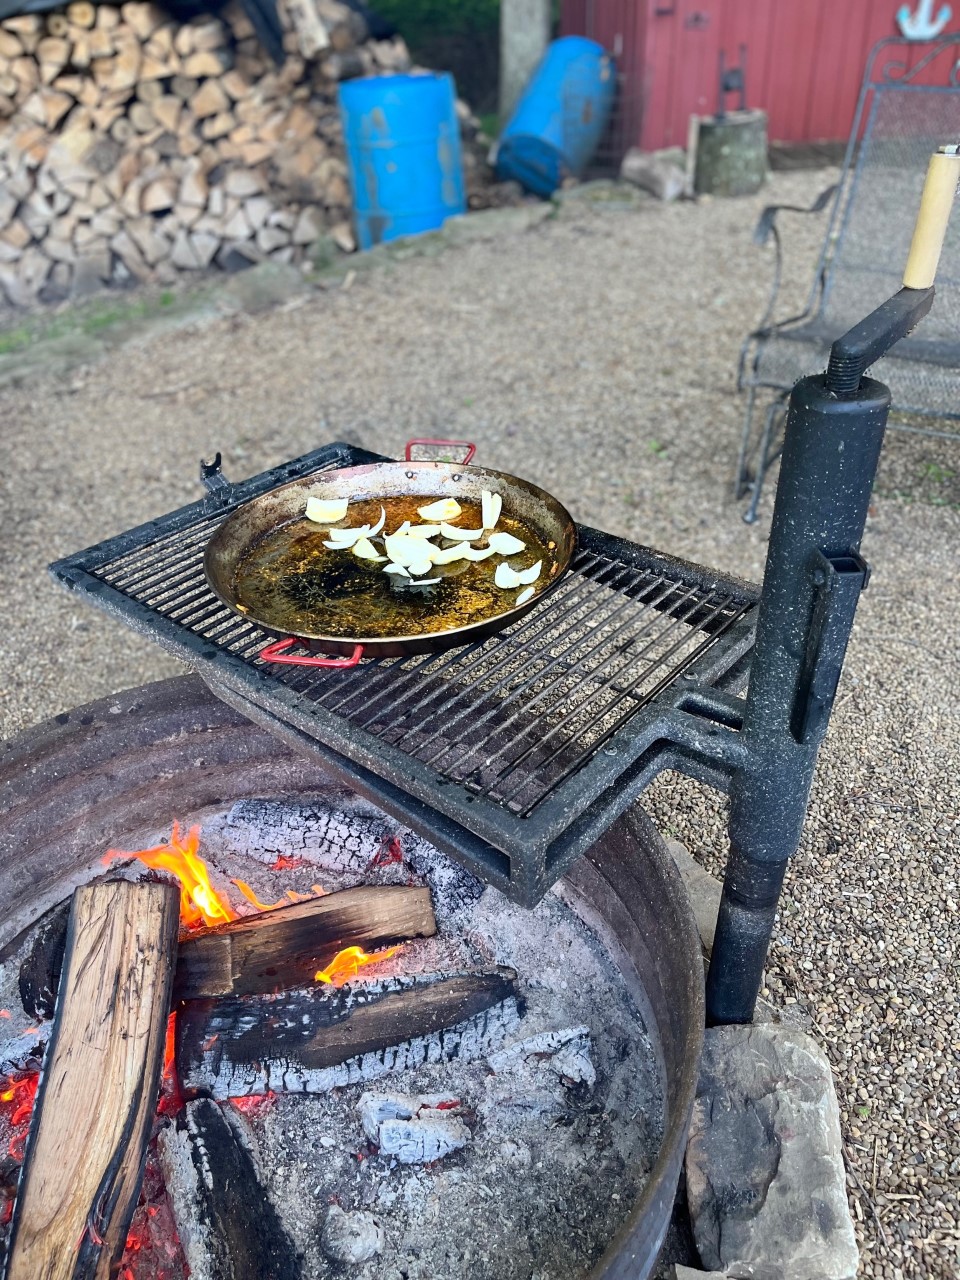 Campfire grill - large skillet - Top view. Onions.